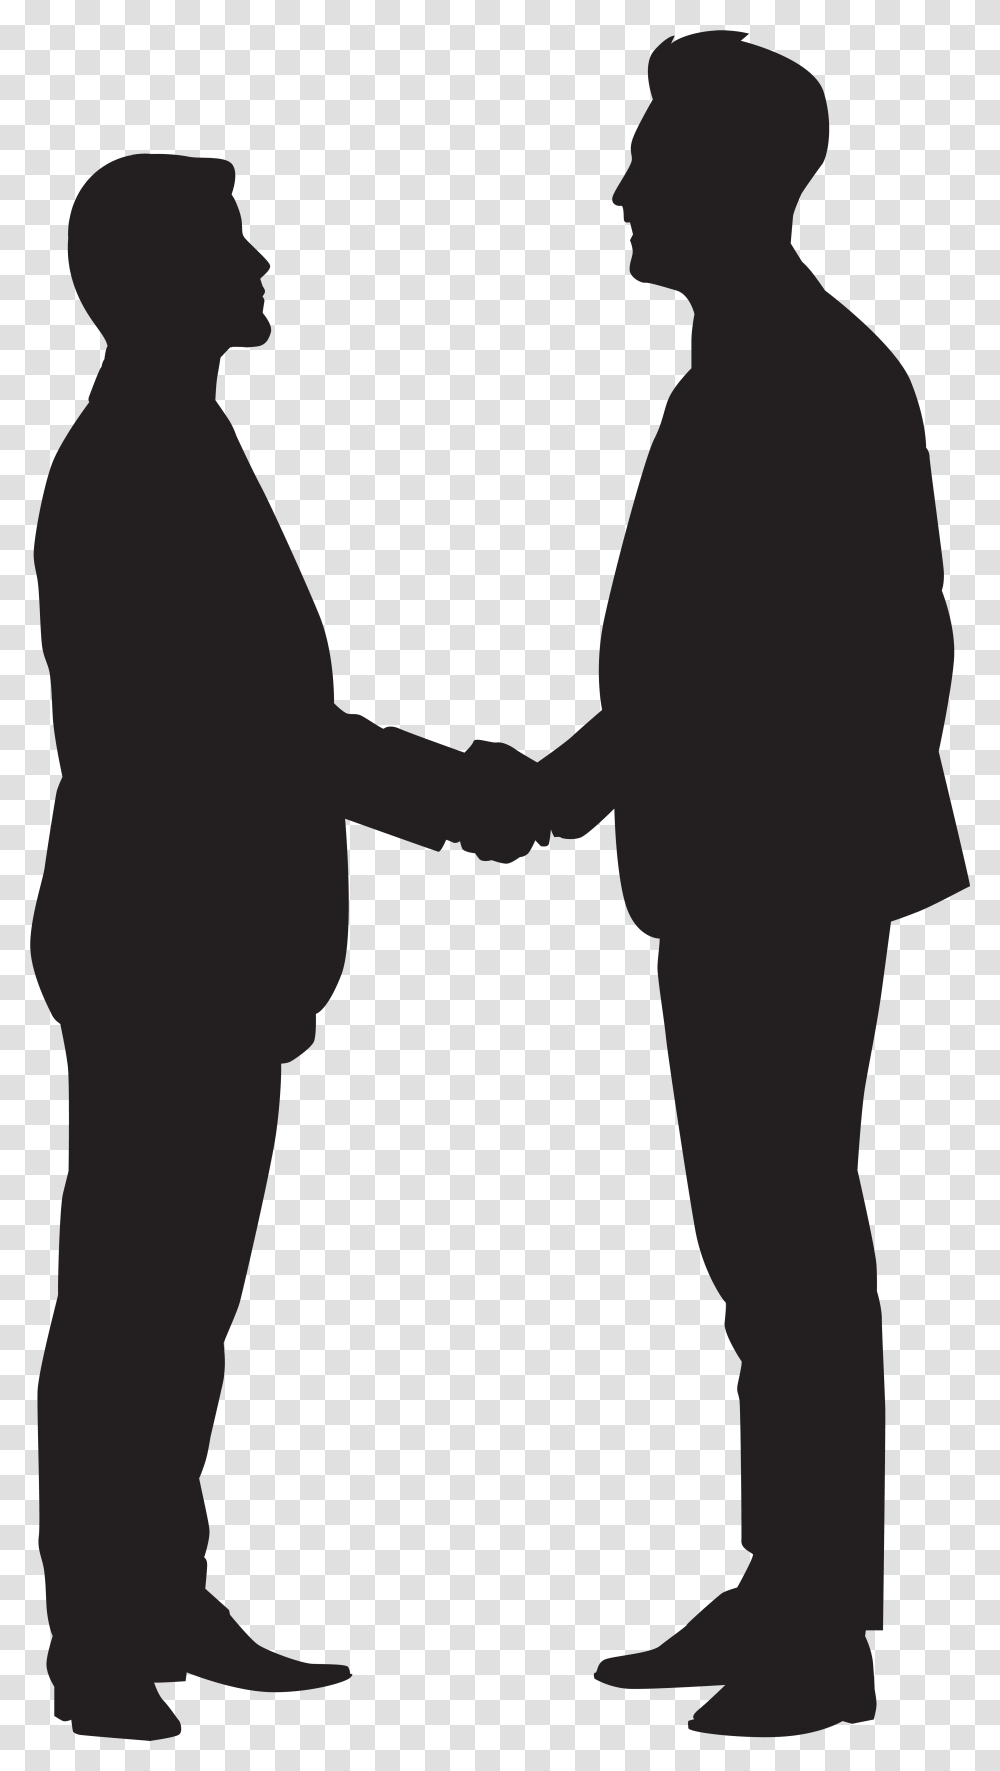 Men Shaking Hands Clipart, Person, Human, Holding Hands, Silhouette Transparent Png